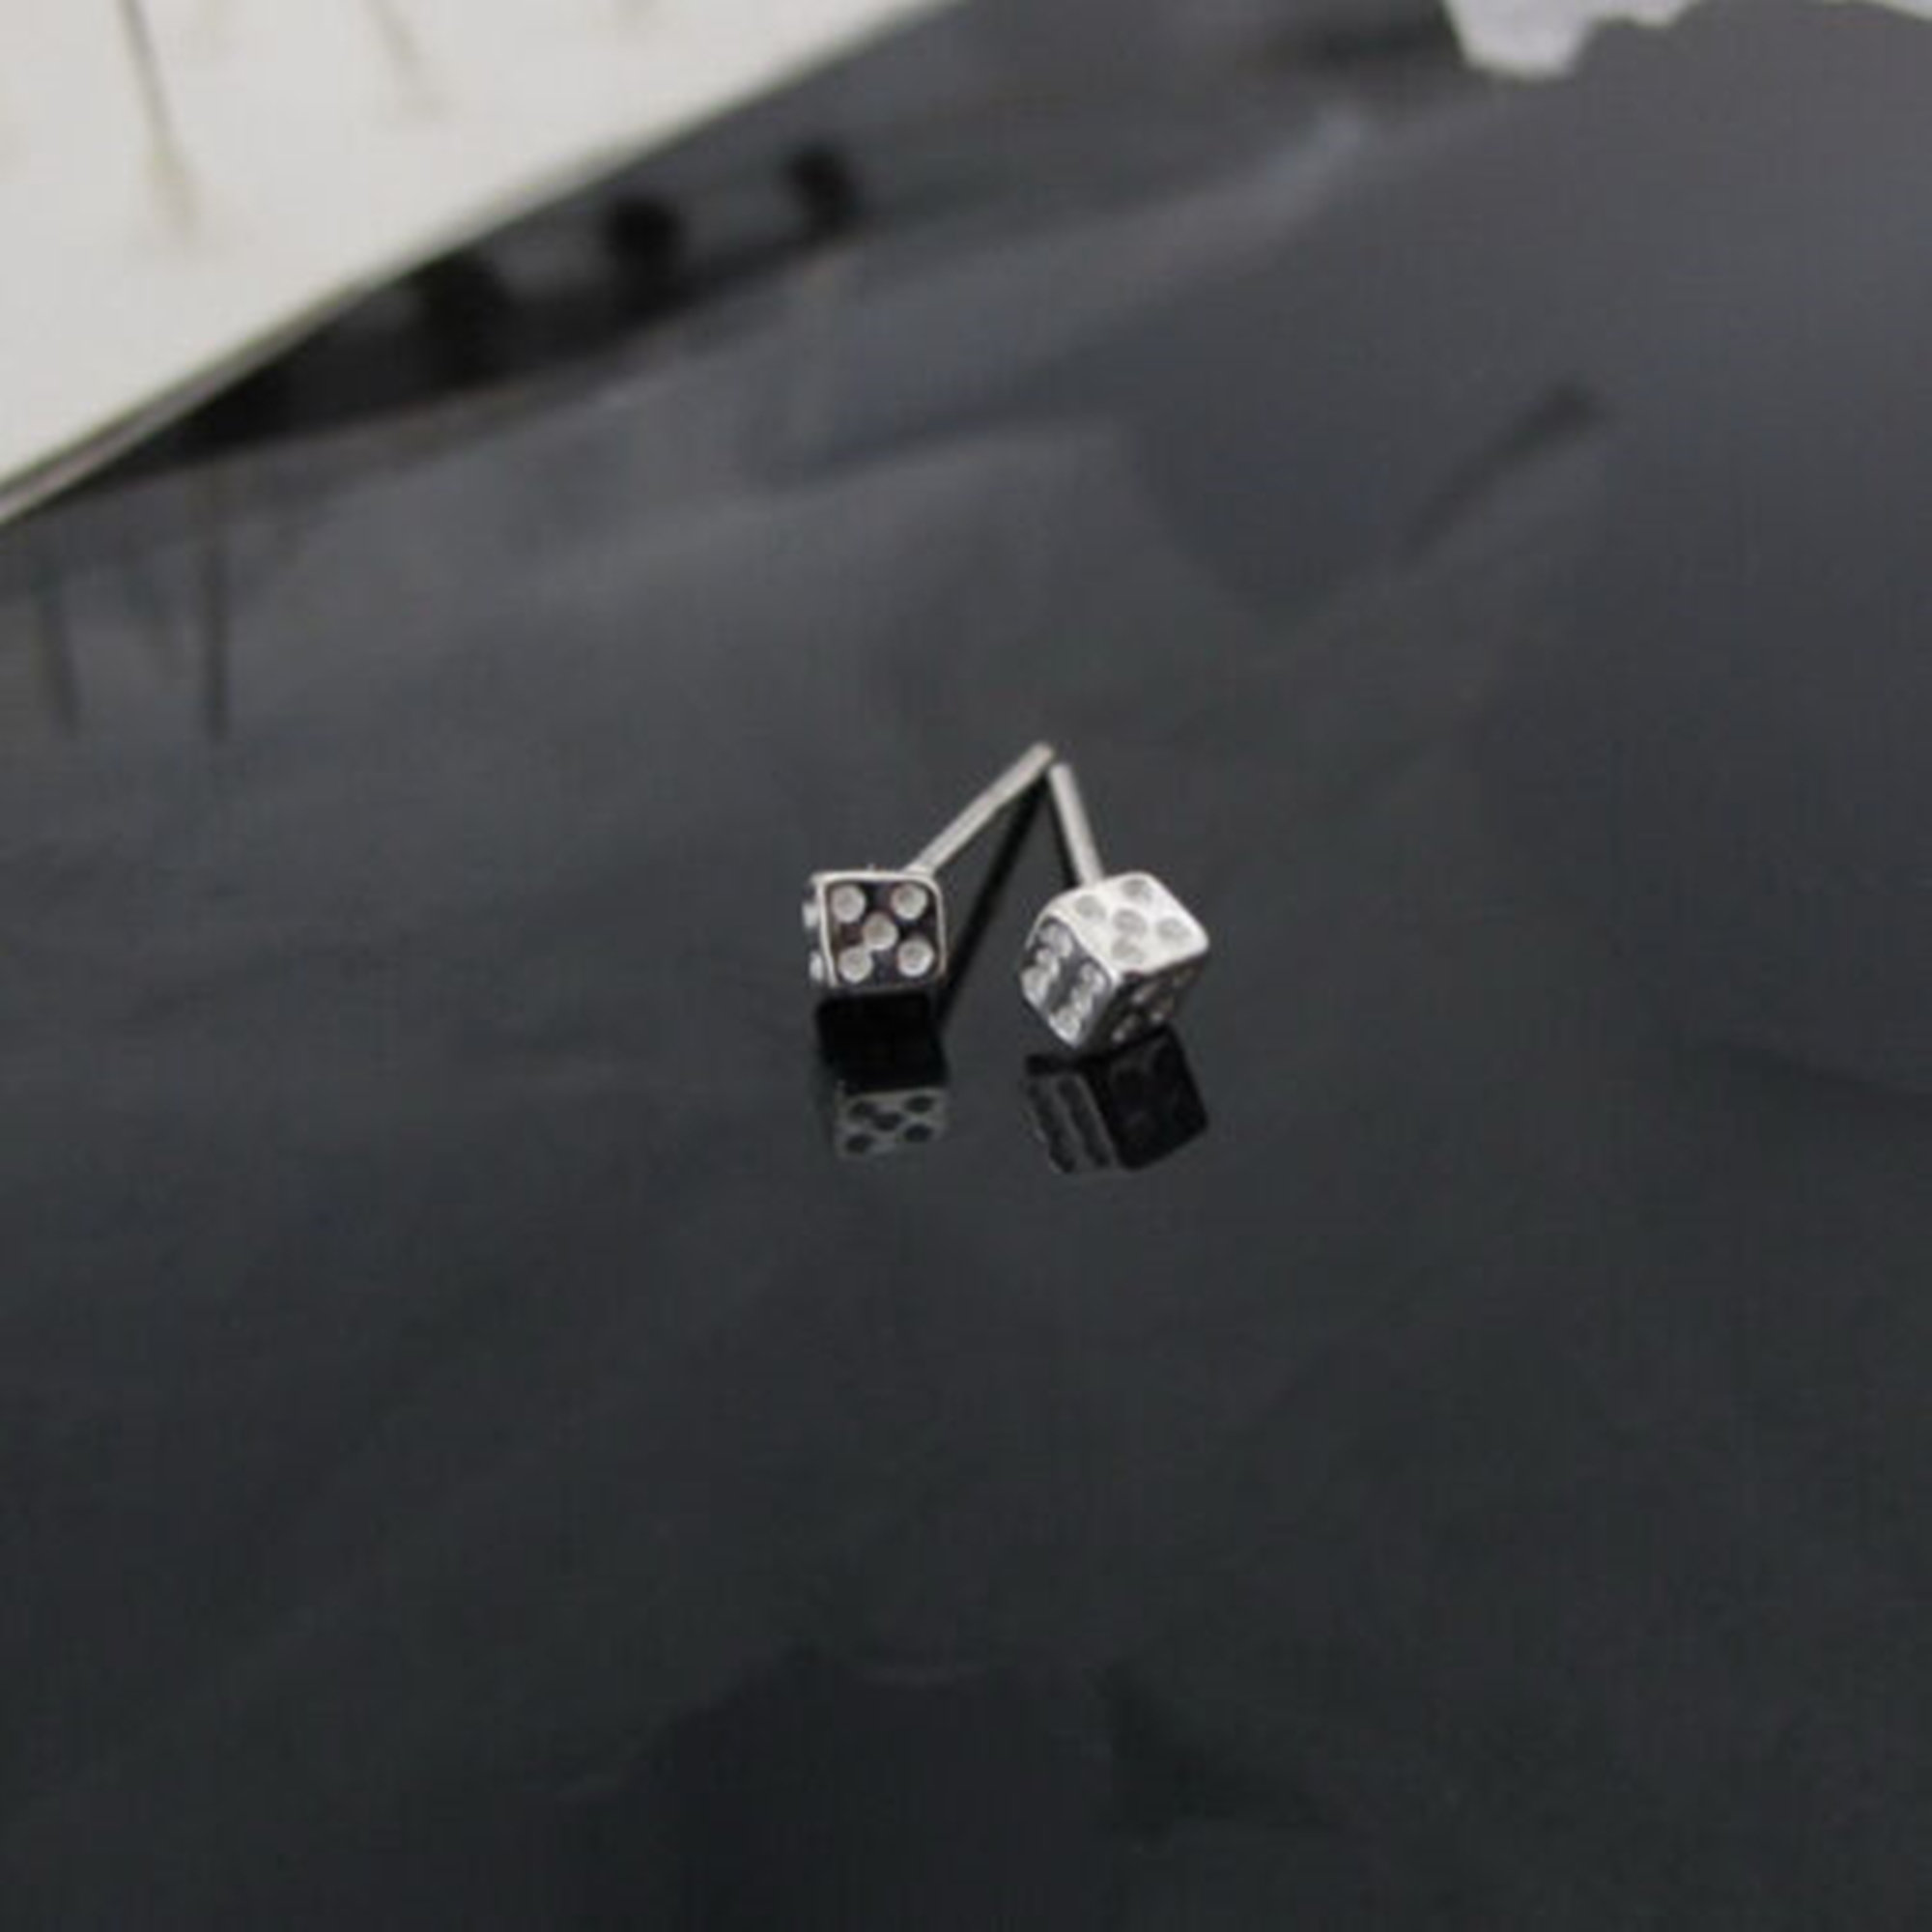 Small Dice Blue 3mm Sterling Silver 925 Studs Earrings Carded